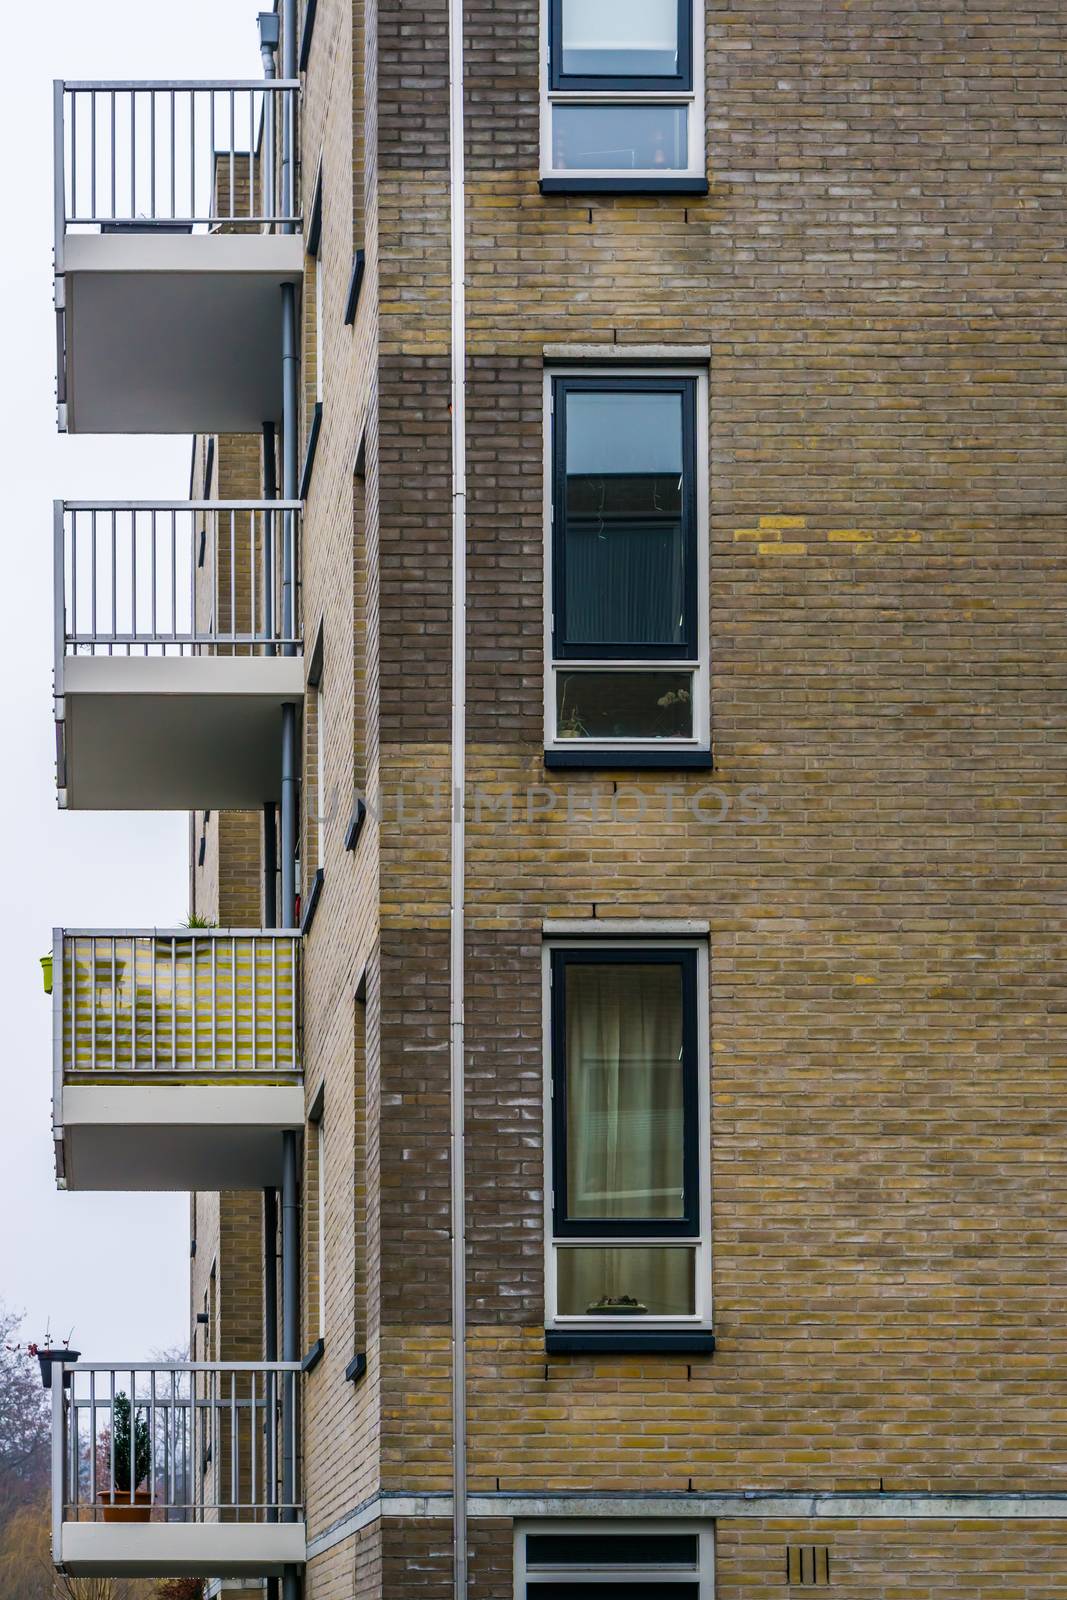 Modern dutch city architecture, apartments complex with balcony's and windows by charlottebleijenberg